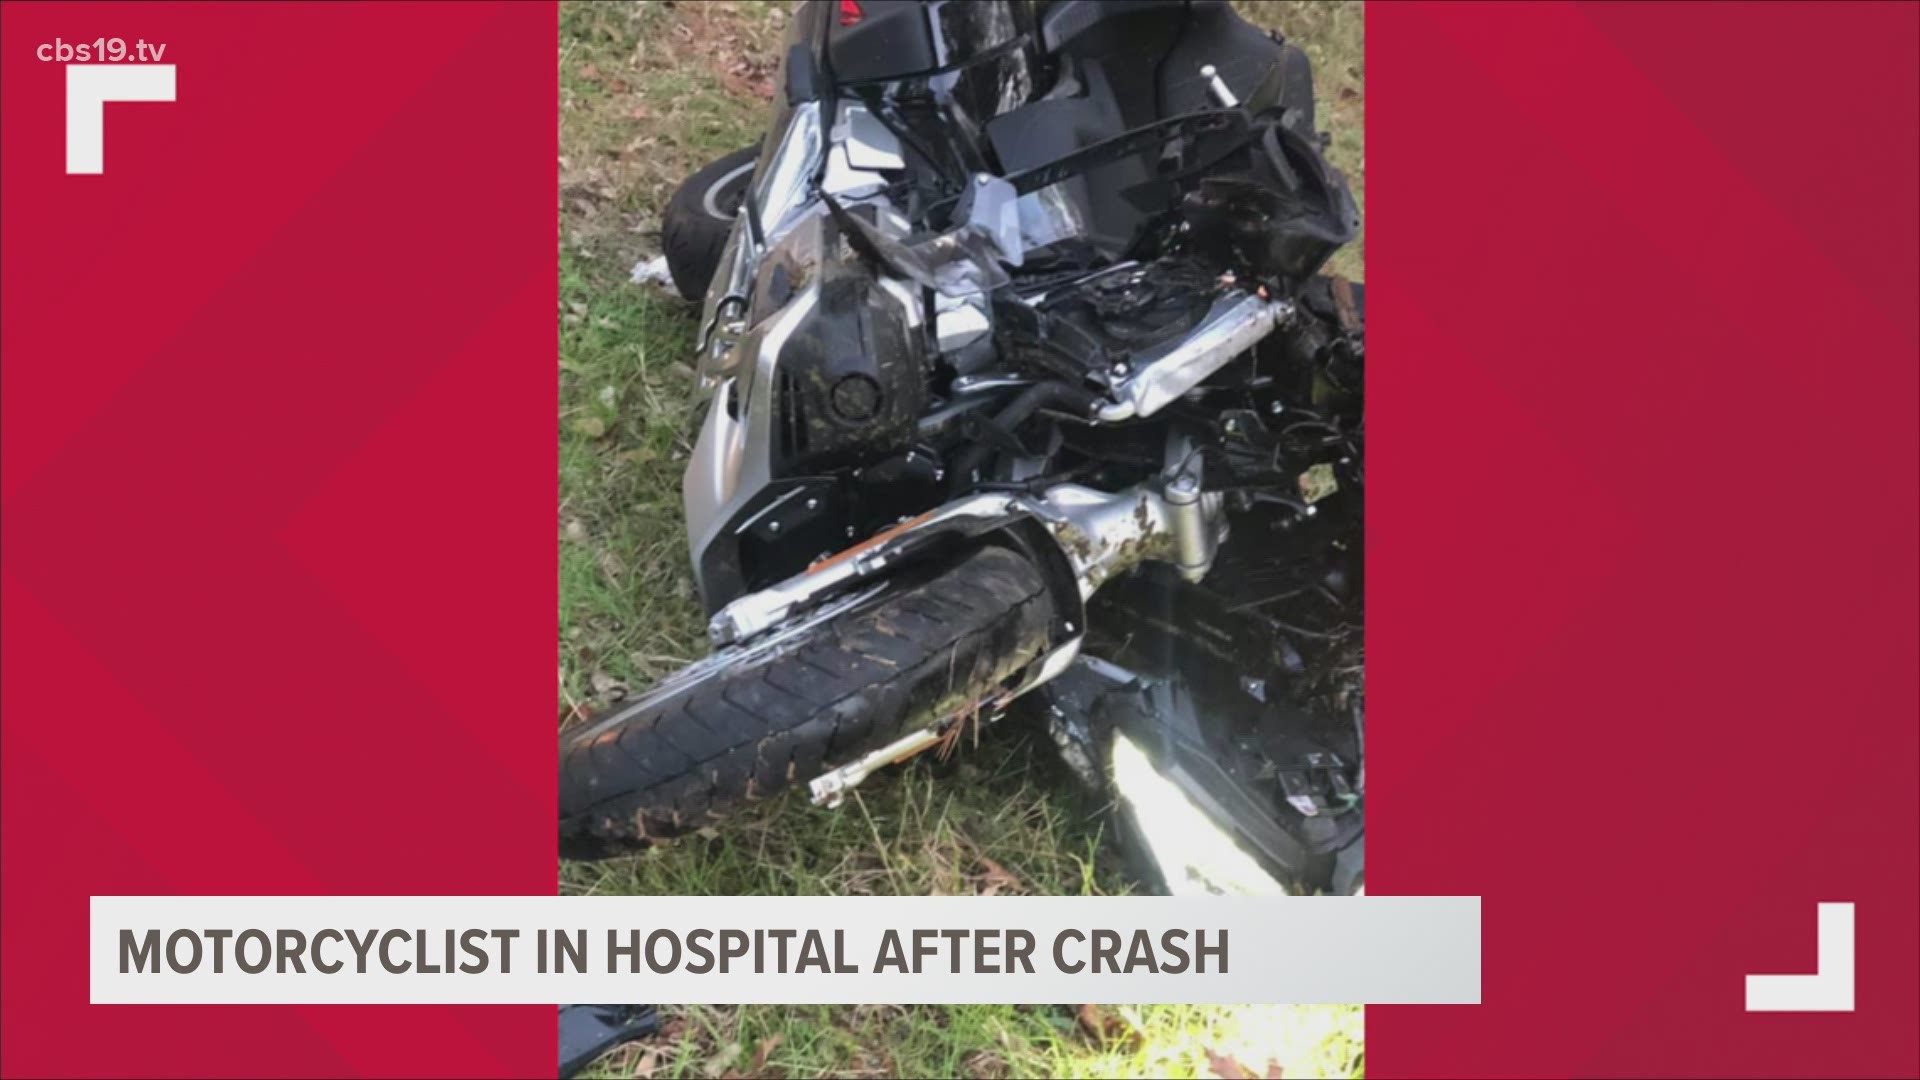 Officials responded to the scene of the crash around 4:45 p.m. in the 8900 block of Farm-to-Market Road 323, about half-a-mile inside the Cherokee County line.